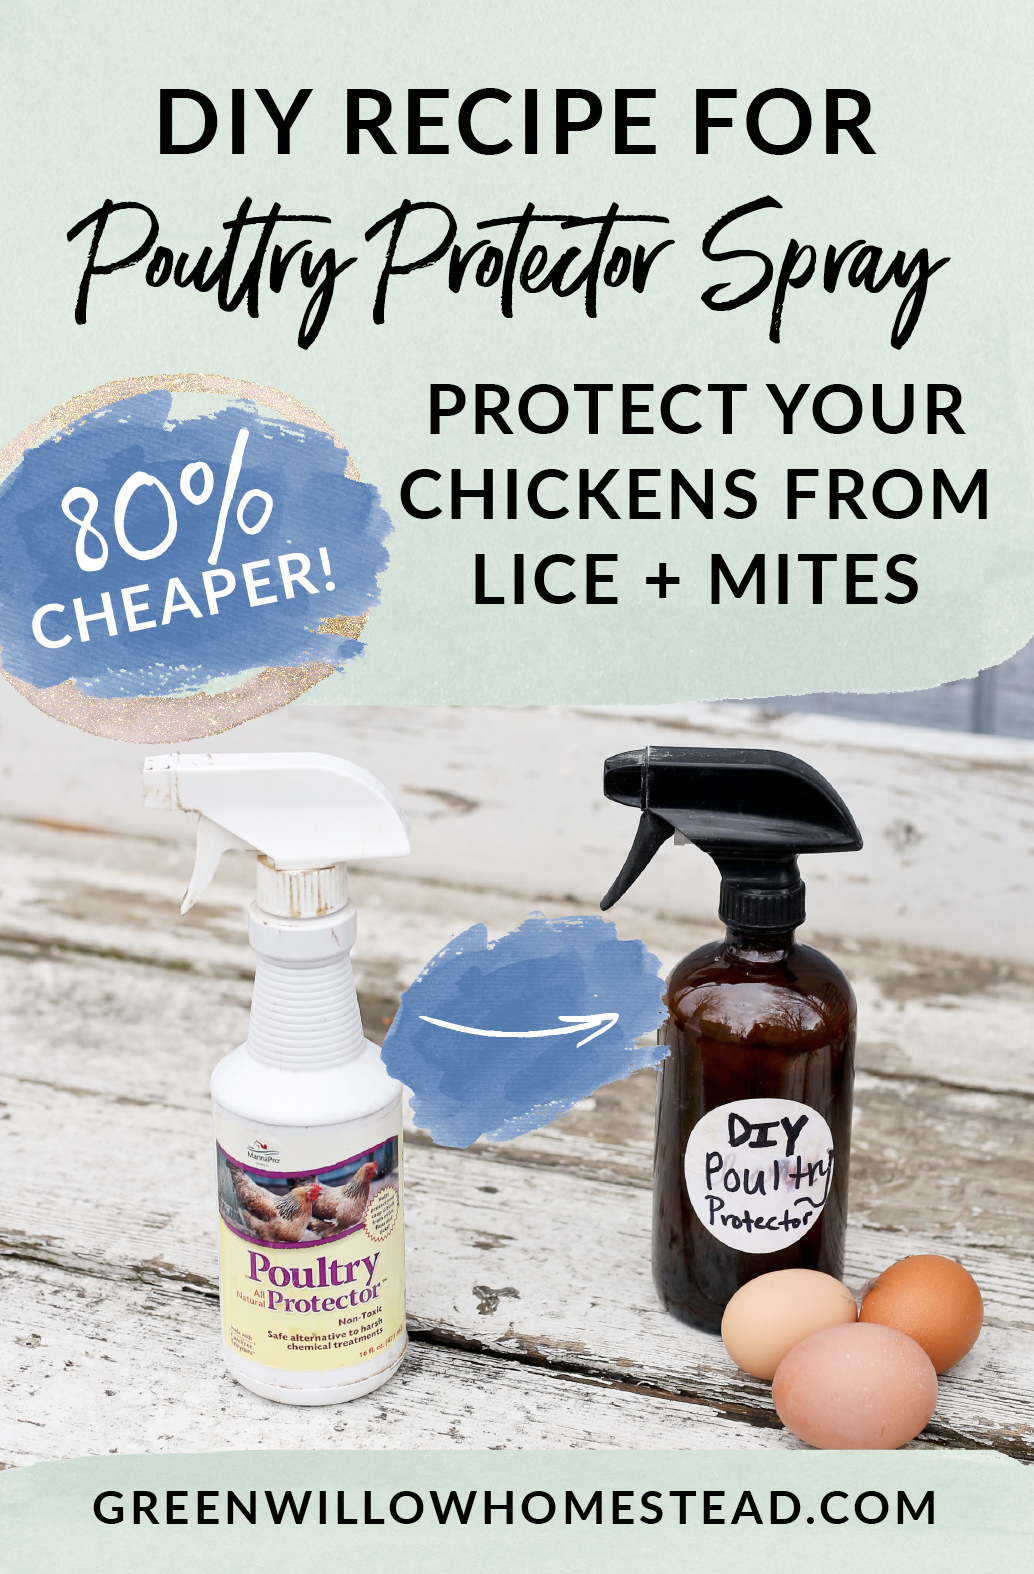 Make Your Own Poultry Protector Spray DIY Recipe To Protect Chickens From Lice and Mites